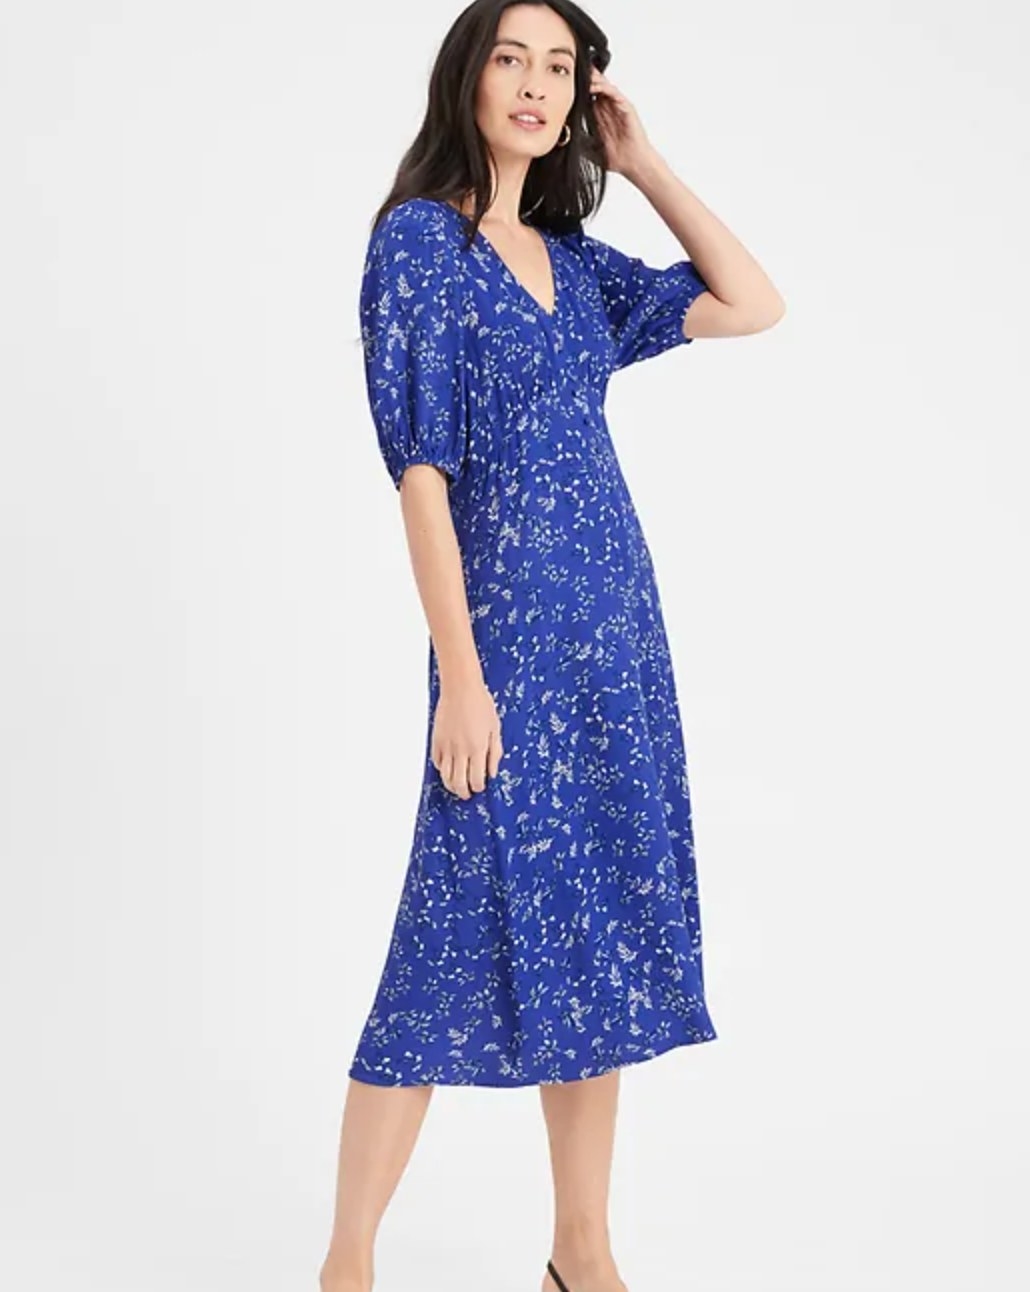 The button-front midi dress in royal blue